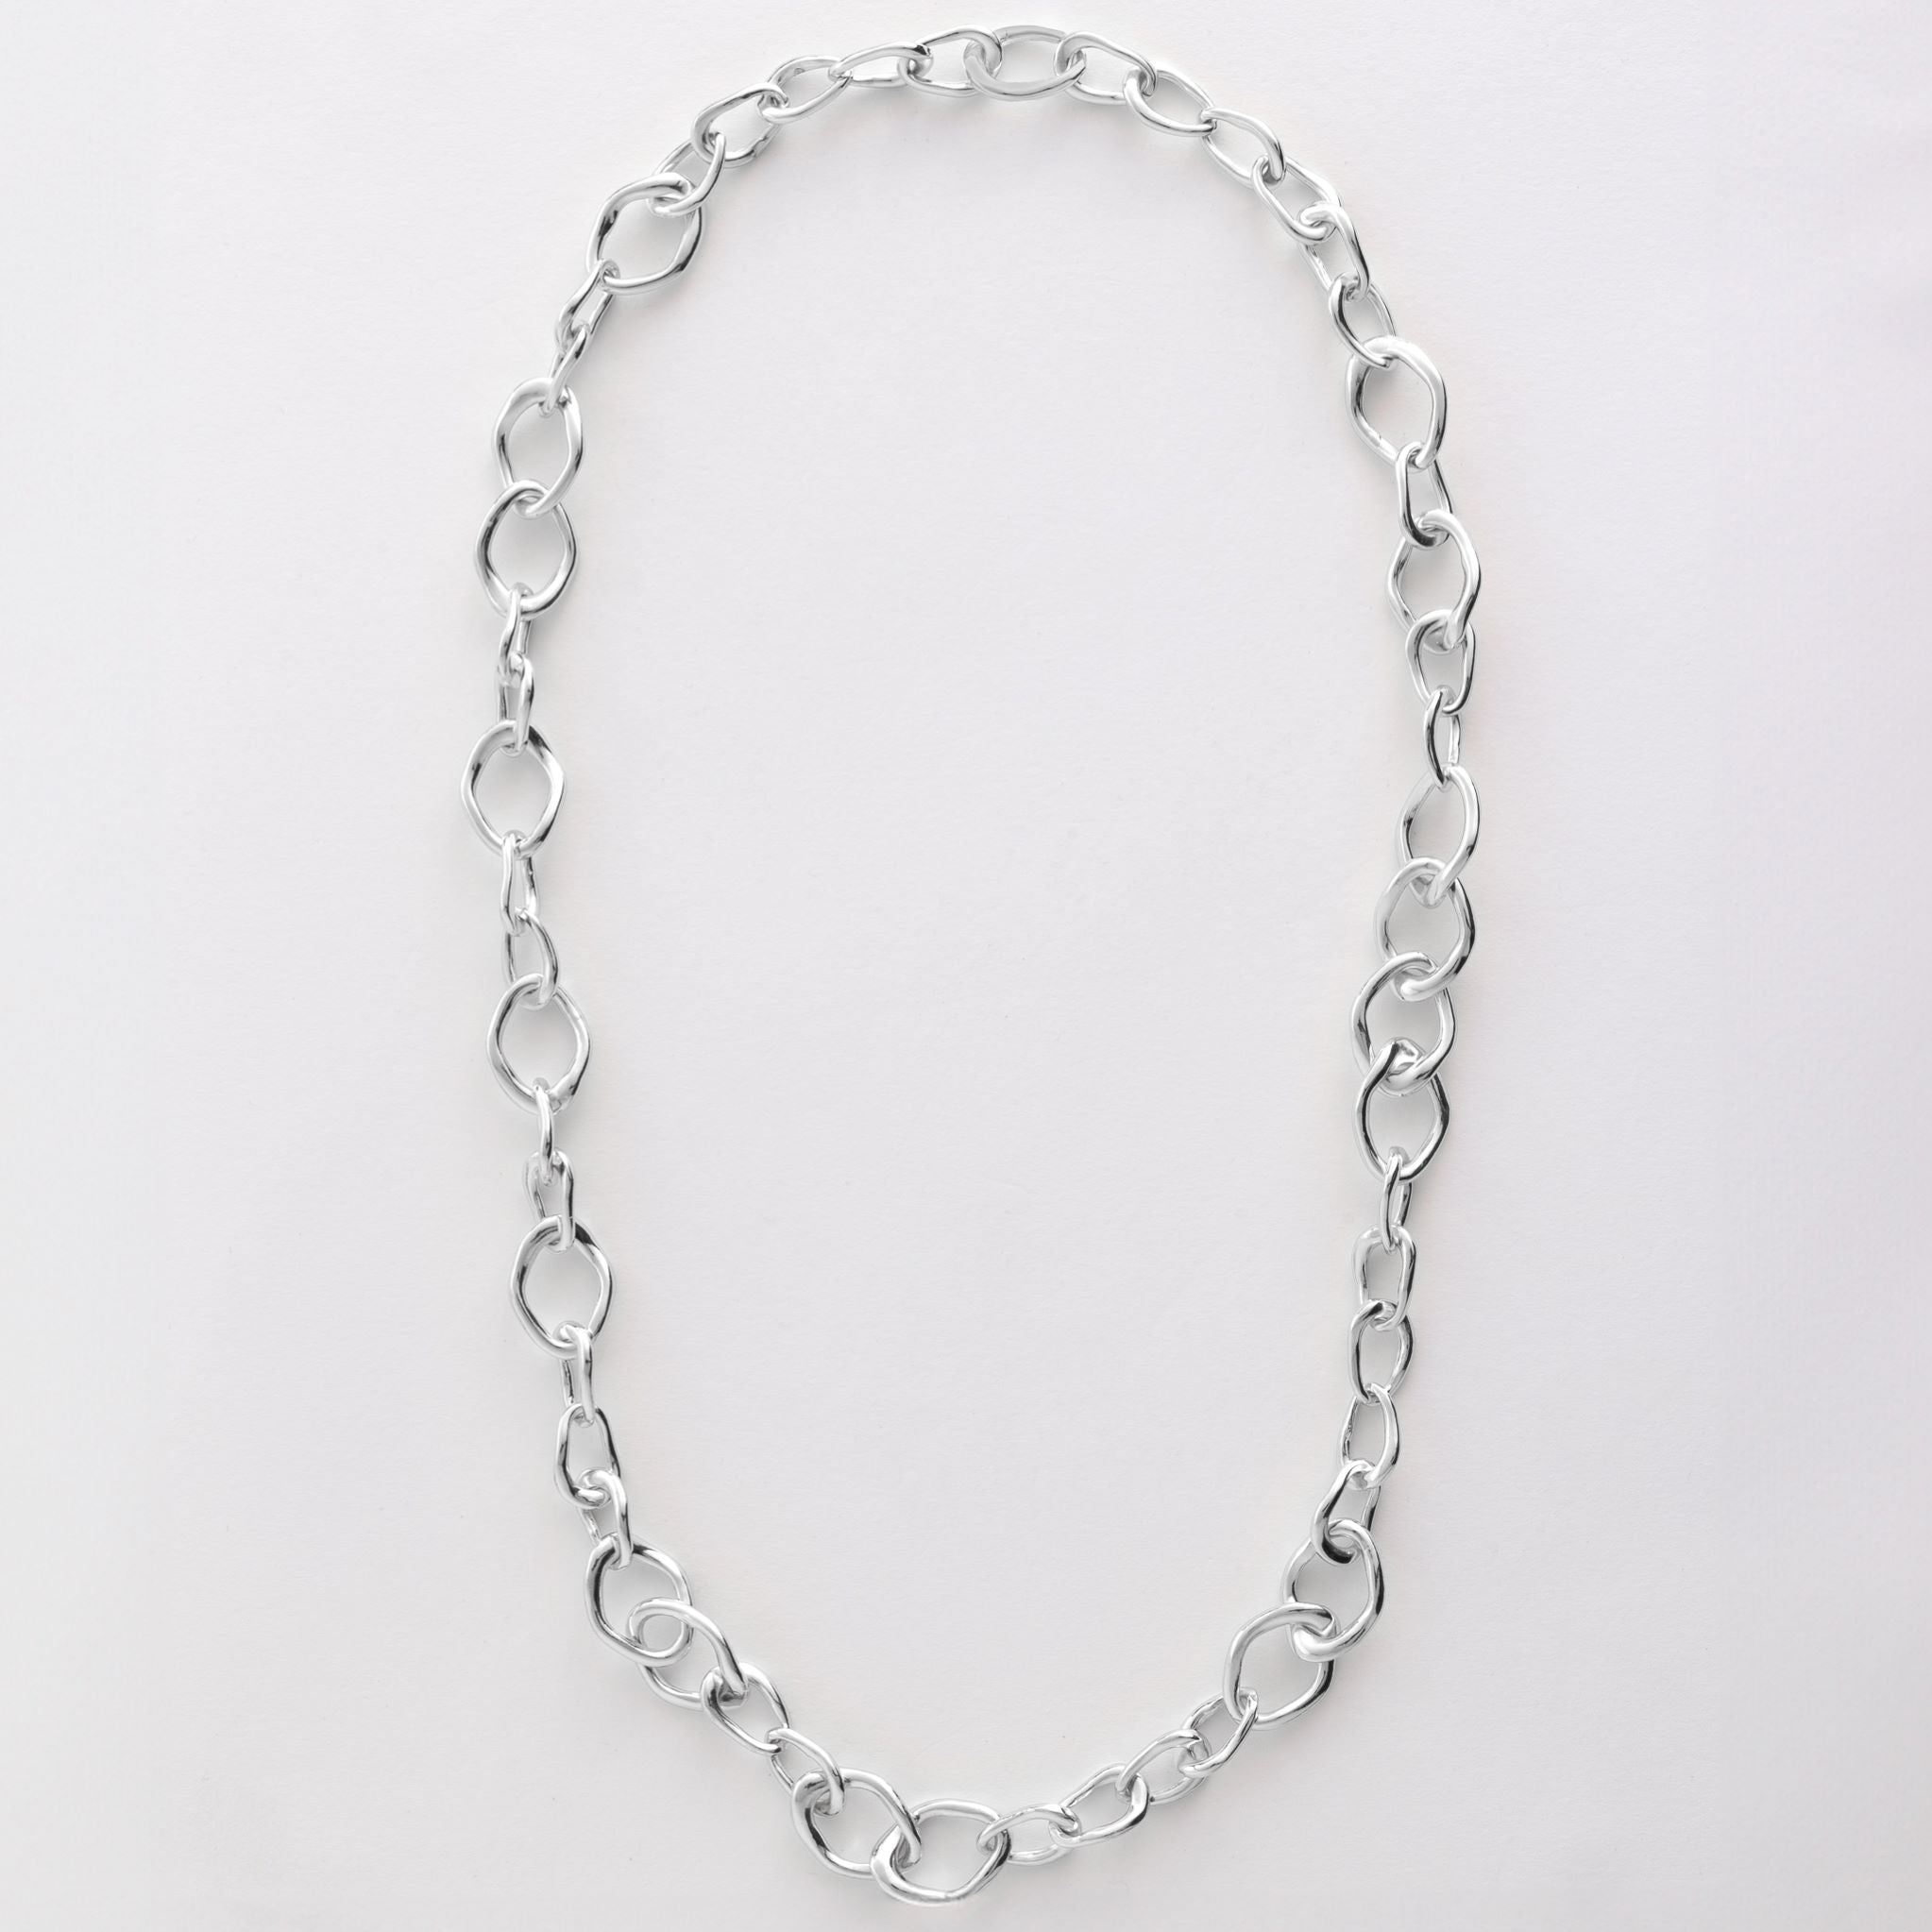 Chain features a handcut natural ripple shape and is crafted from sterling silver or 18ct gold vermeil.